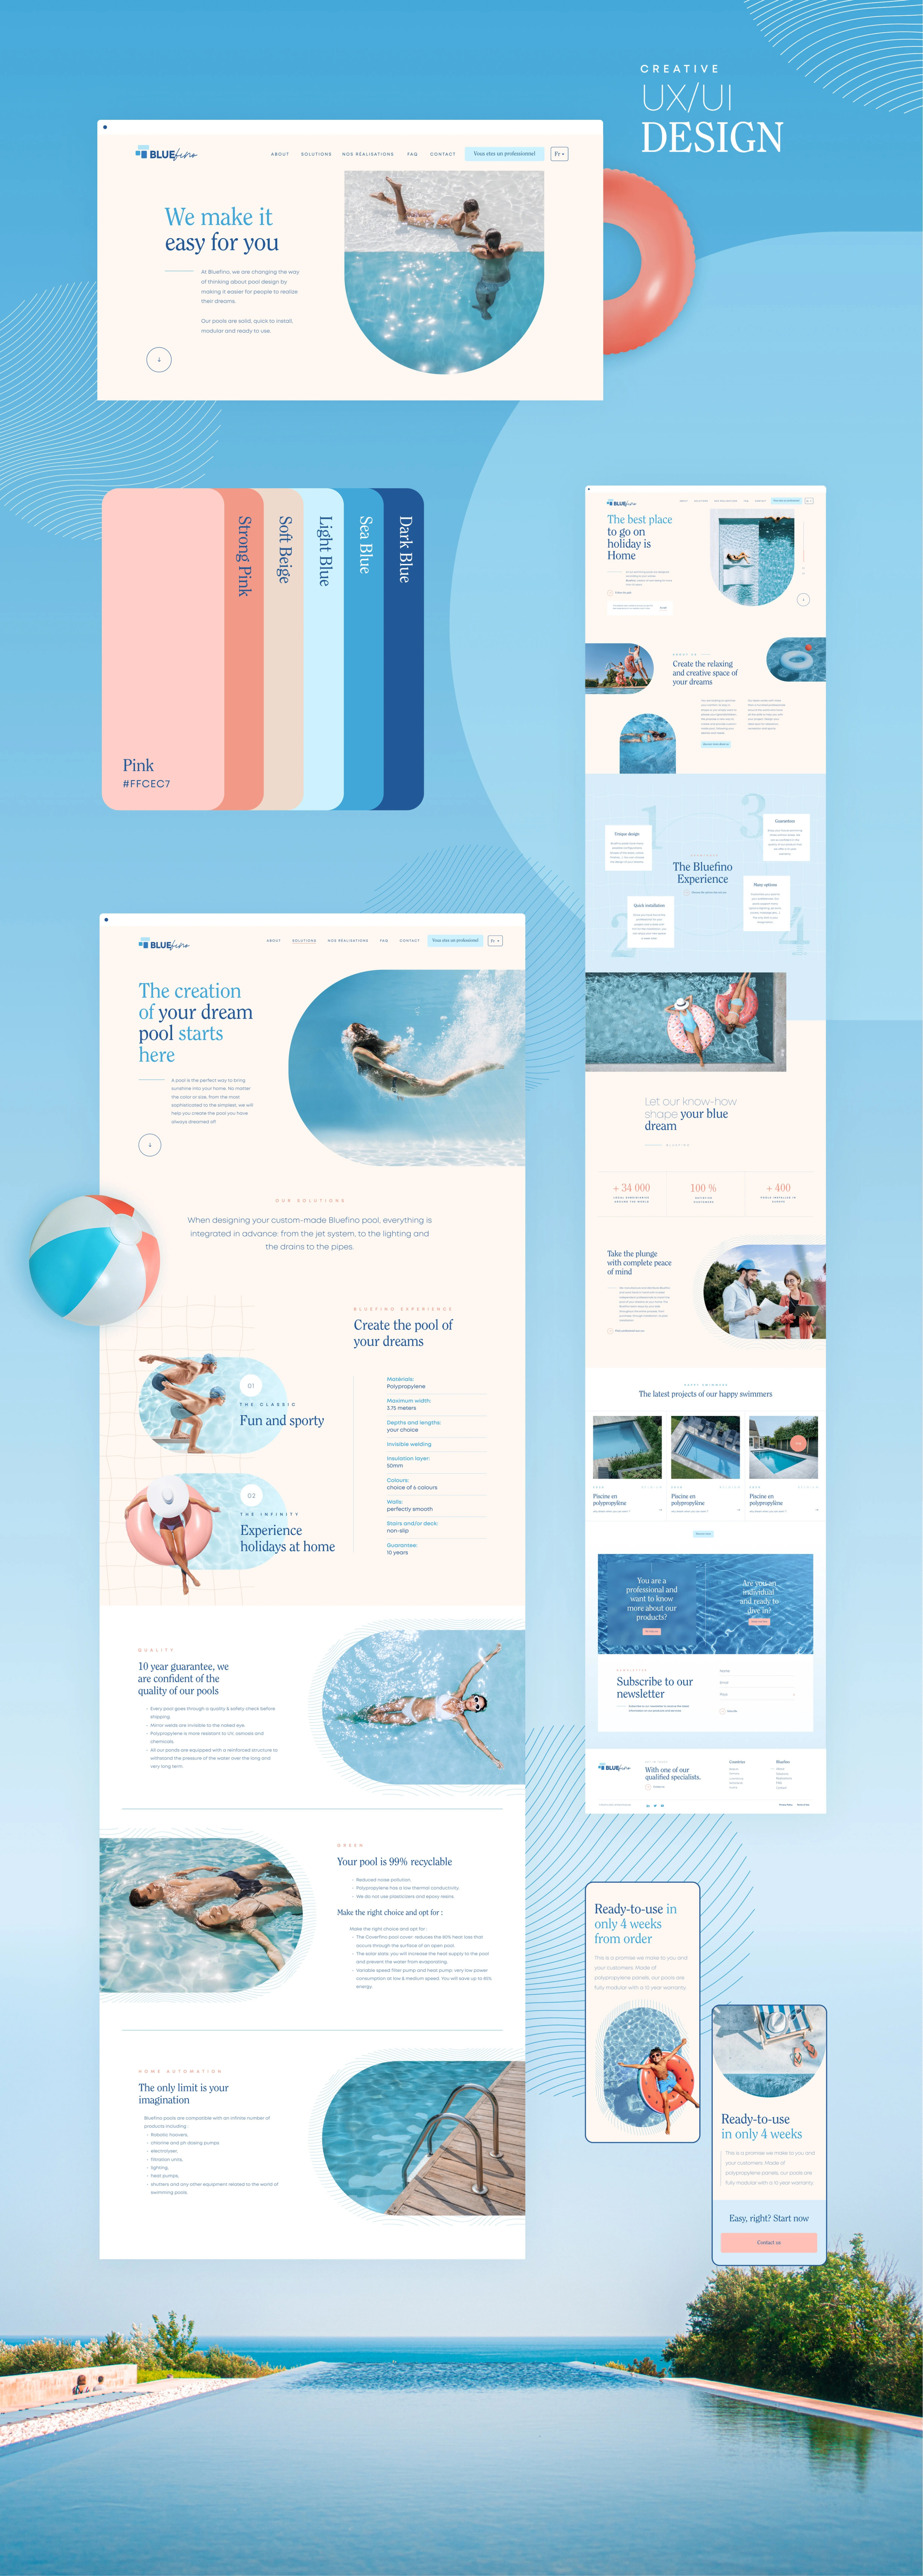 Detail of the digital graphic charter for the Bluefino website by Atelier Design